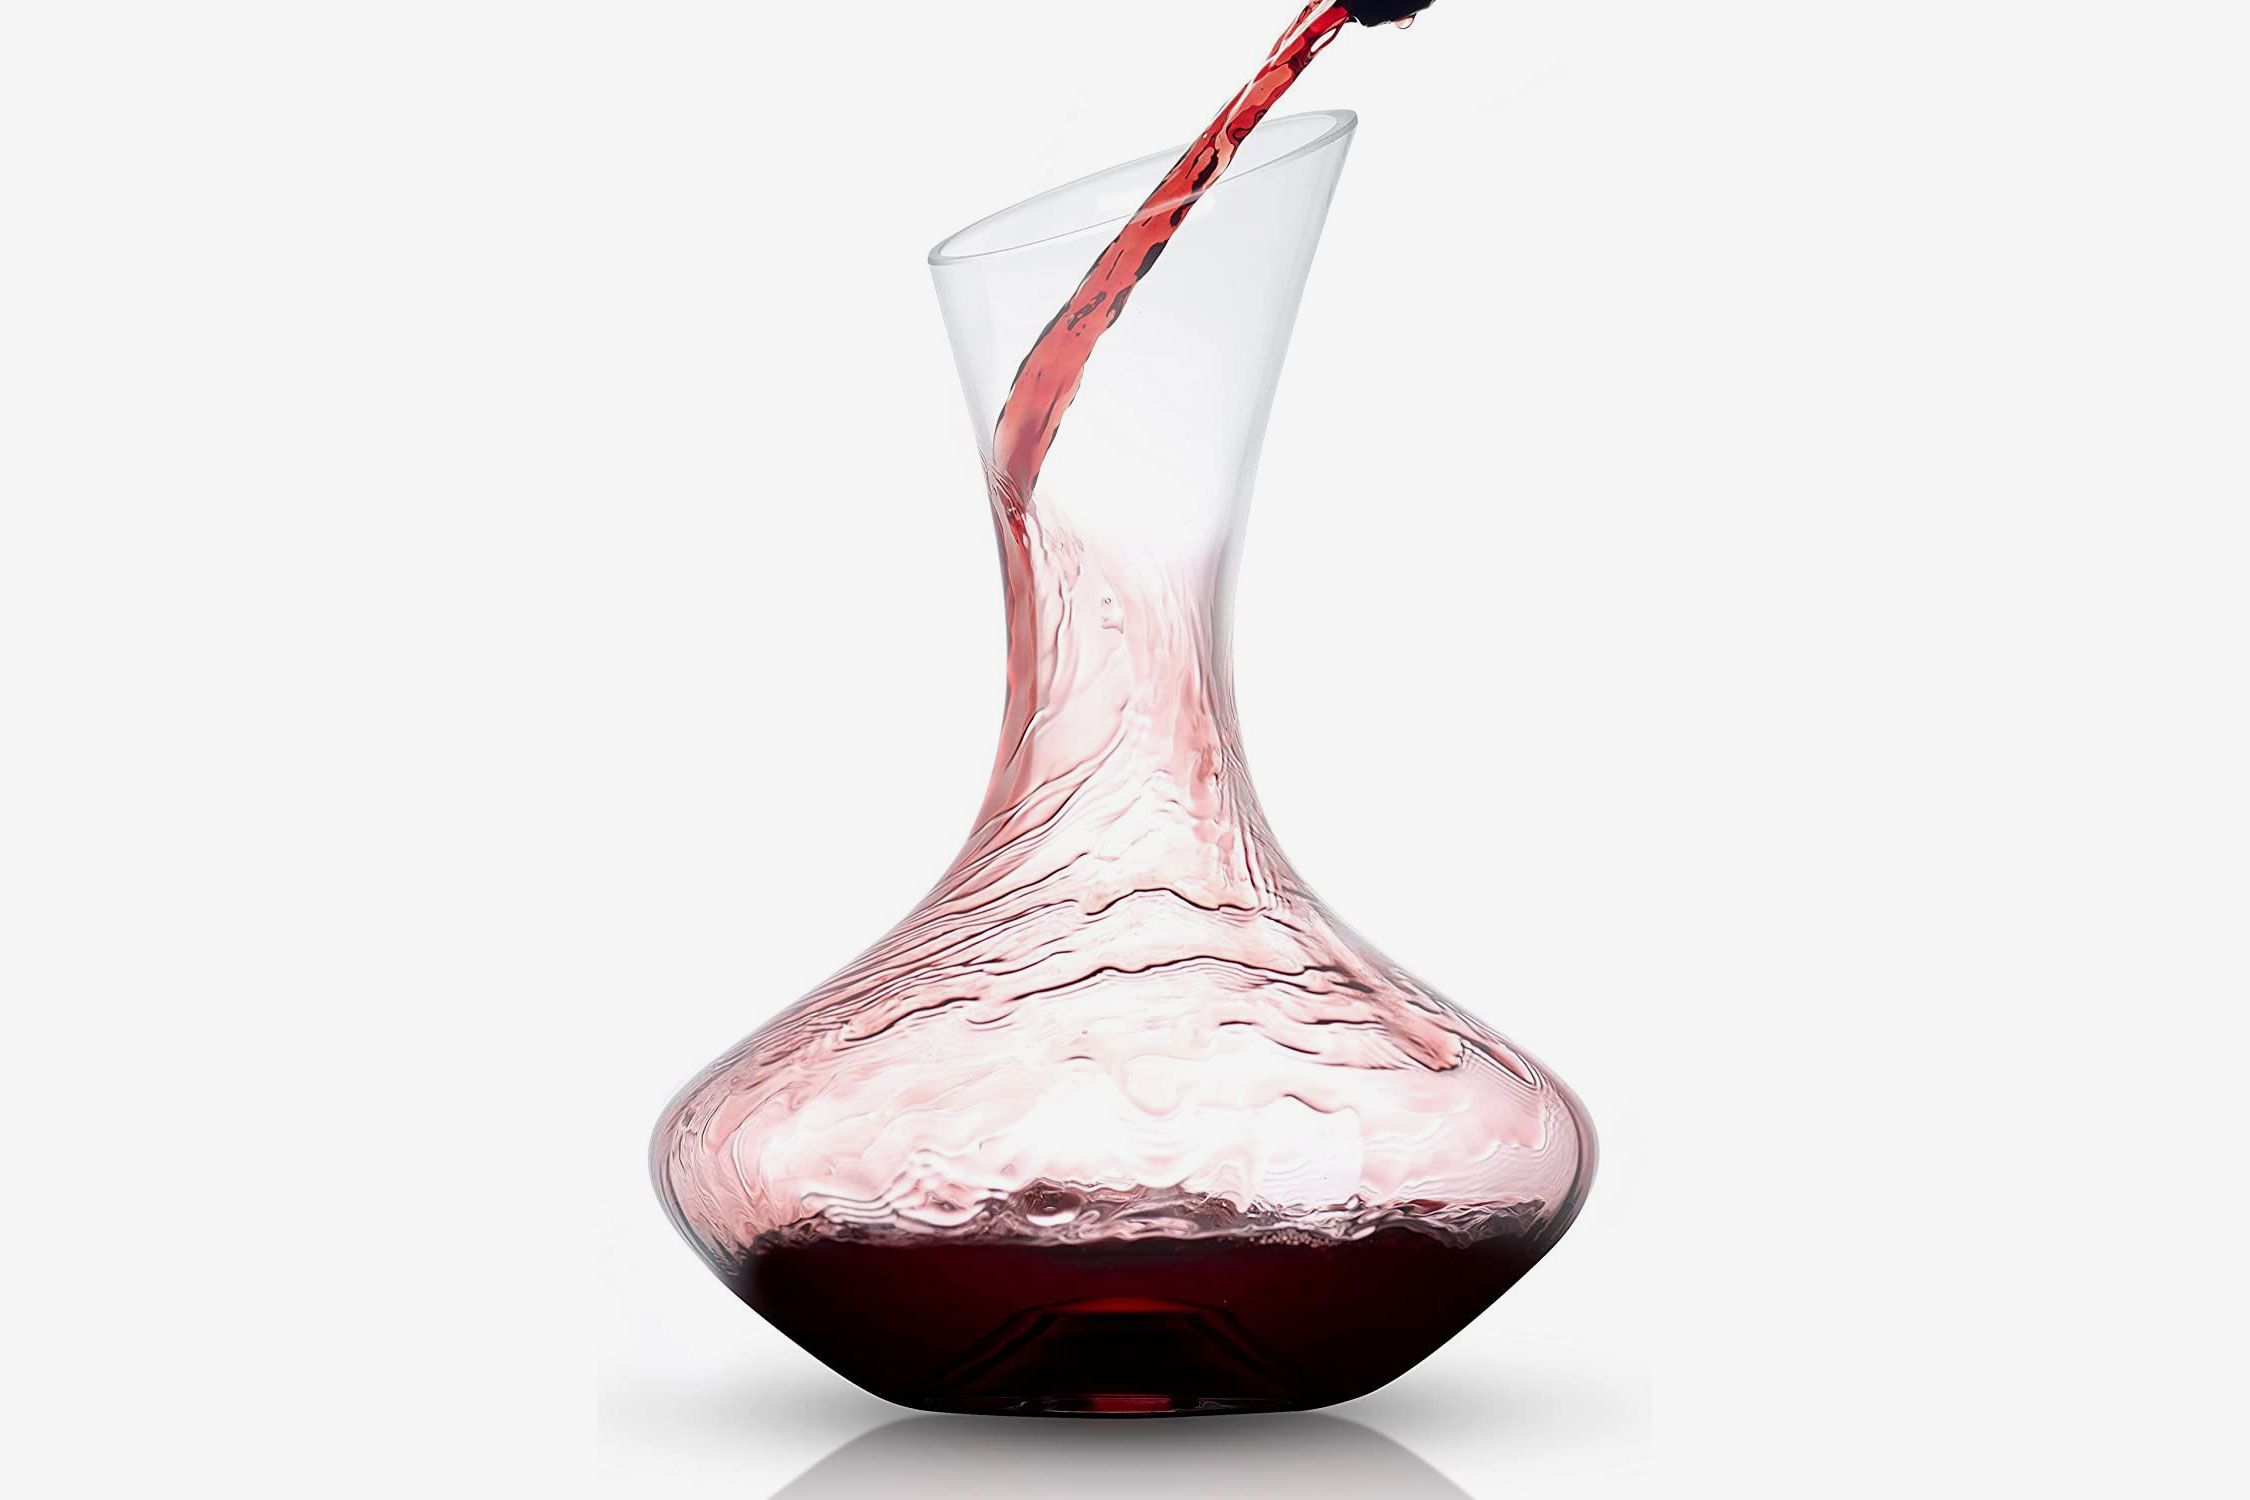 NUTRIUPS Wine Decanter with Stopper Hand Blown Wine Aerating Decanter Wine  Carafe Decanter Pierced Decorative Snail Red Wine Decanters with Lid